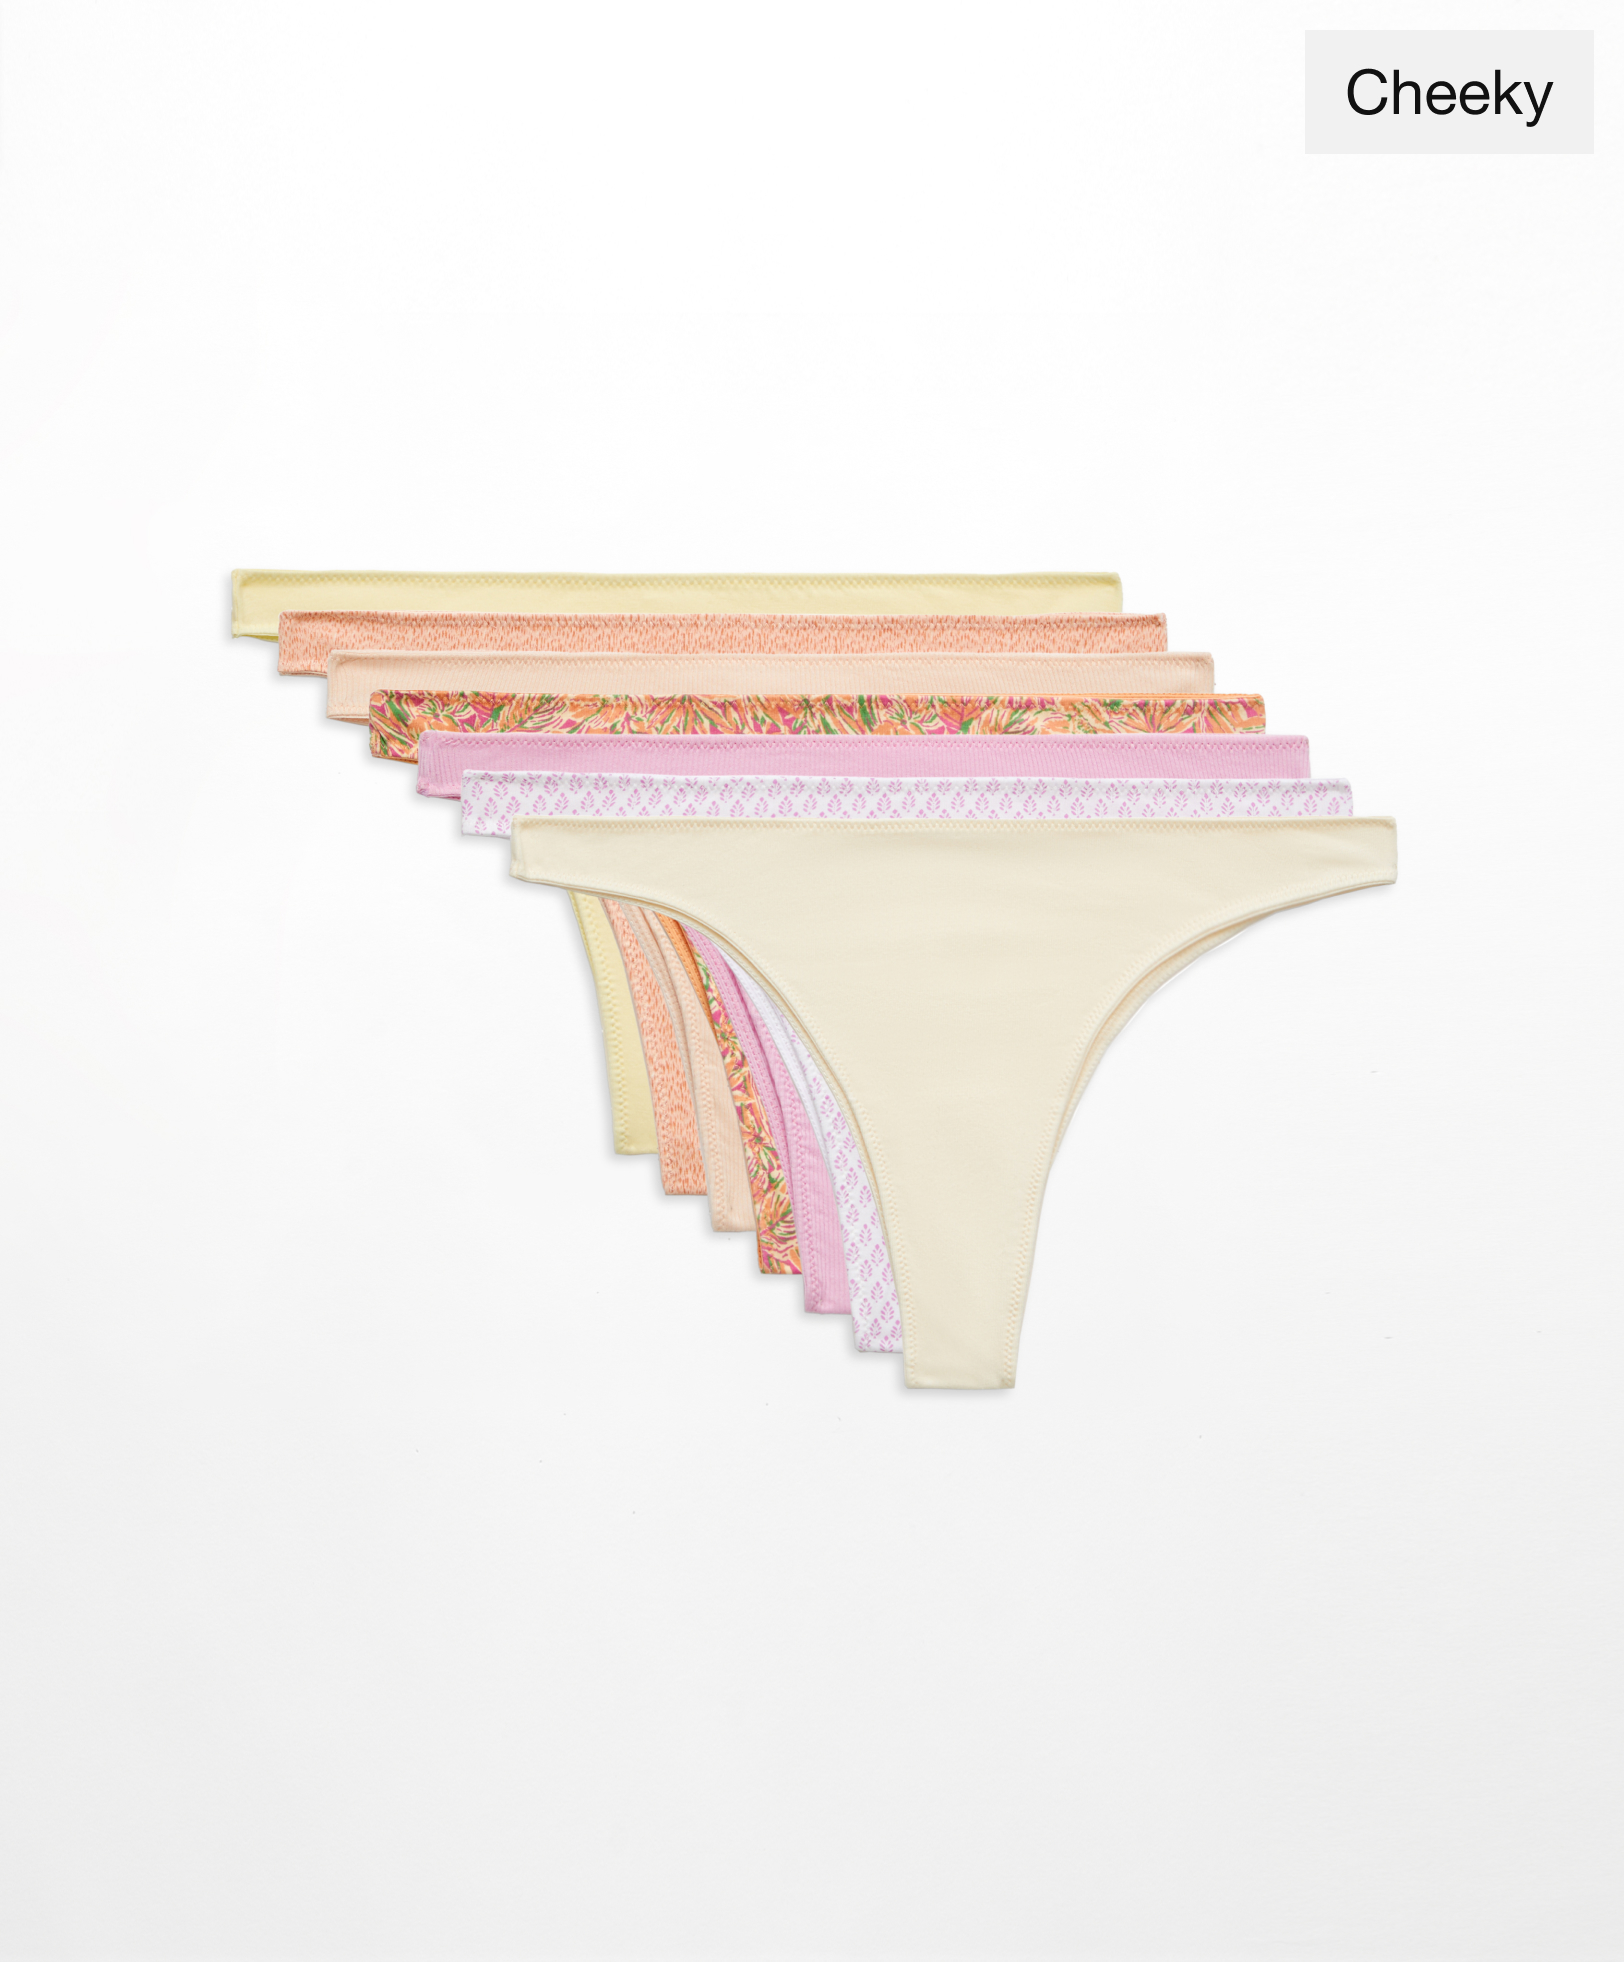 7 printed and textured cotton cheeky briefs